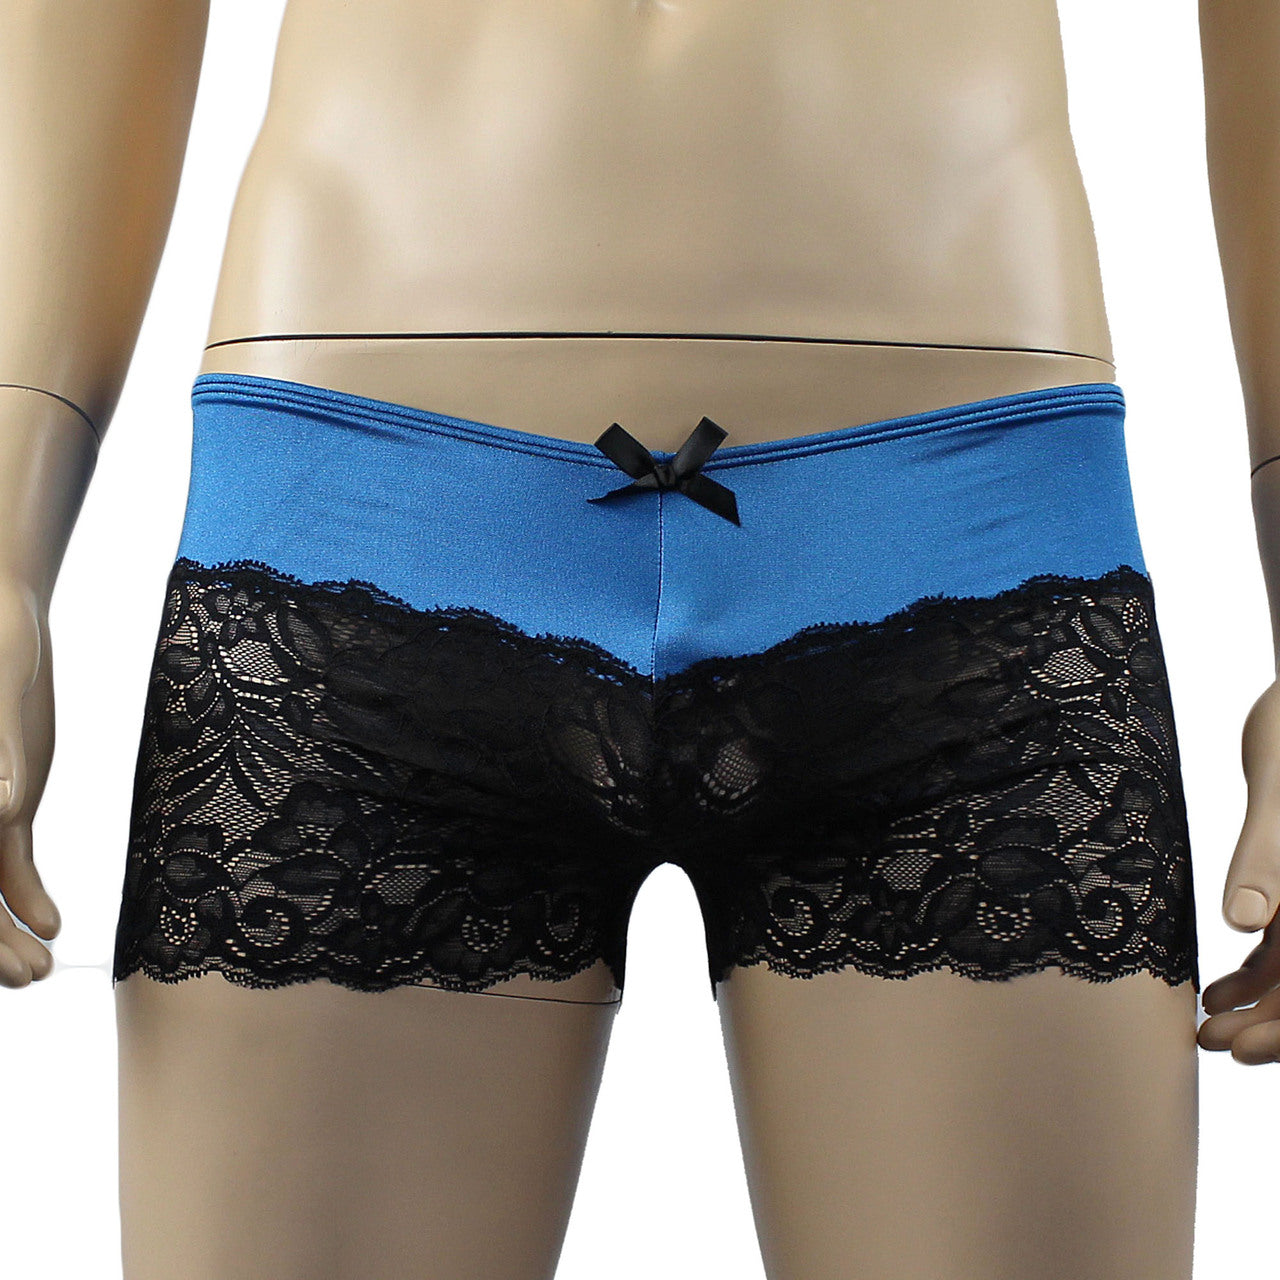 Mens Risque Boxer Briefs Teal and Black Lace